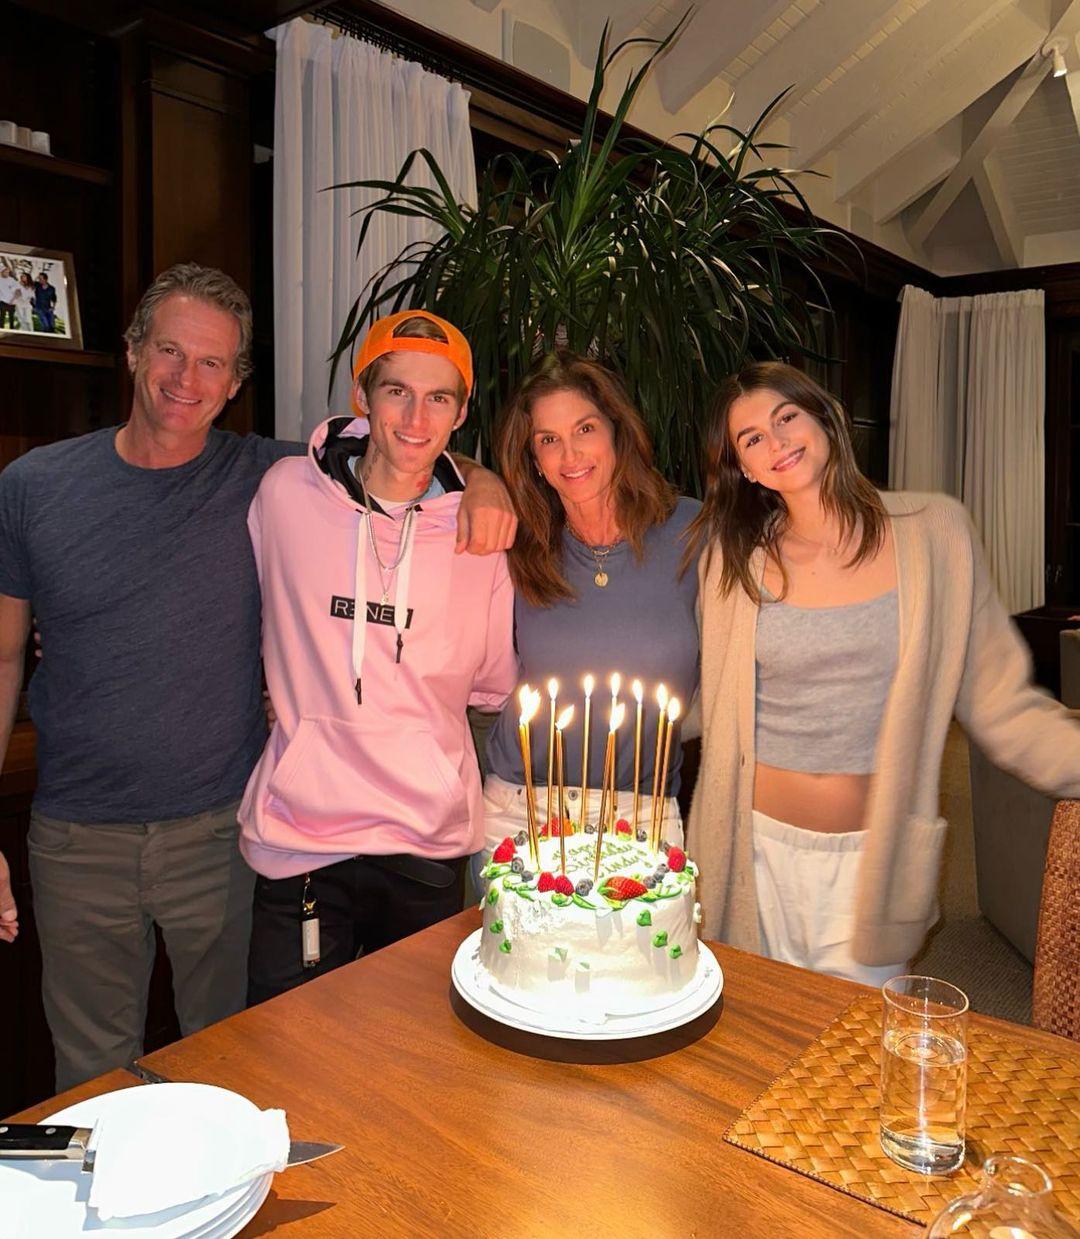 Cindy Crawford celebrates birthday with daughter Kaia Gerber and family